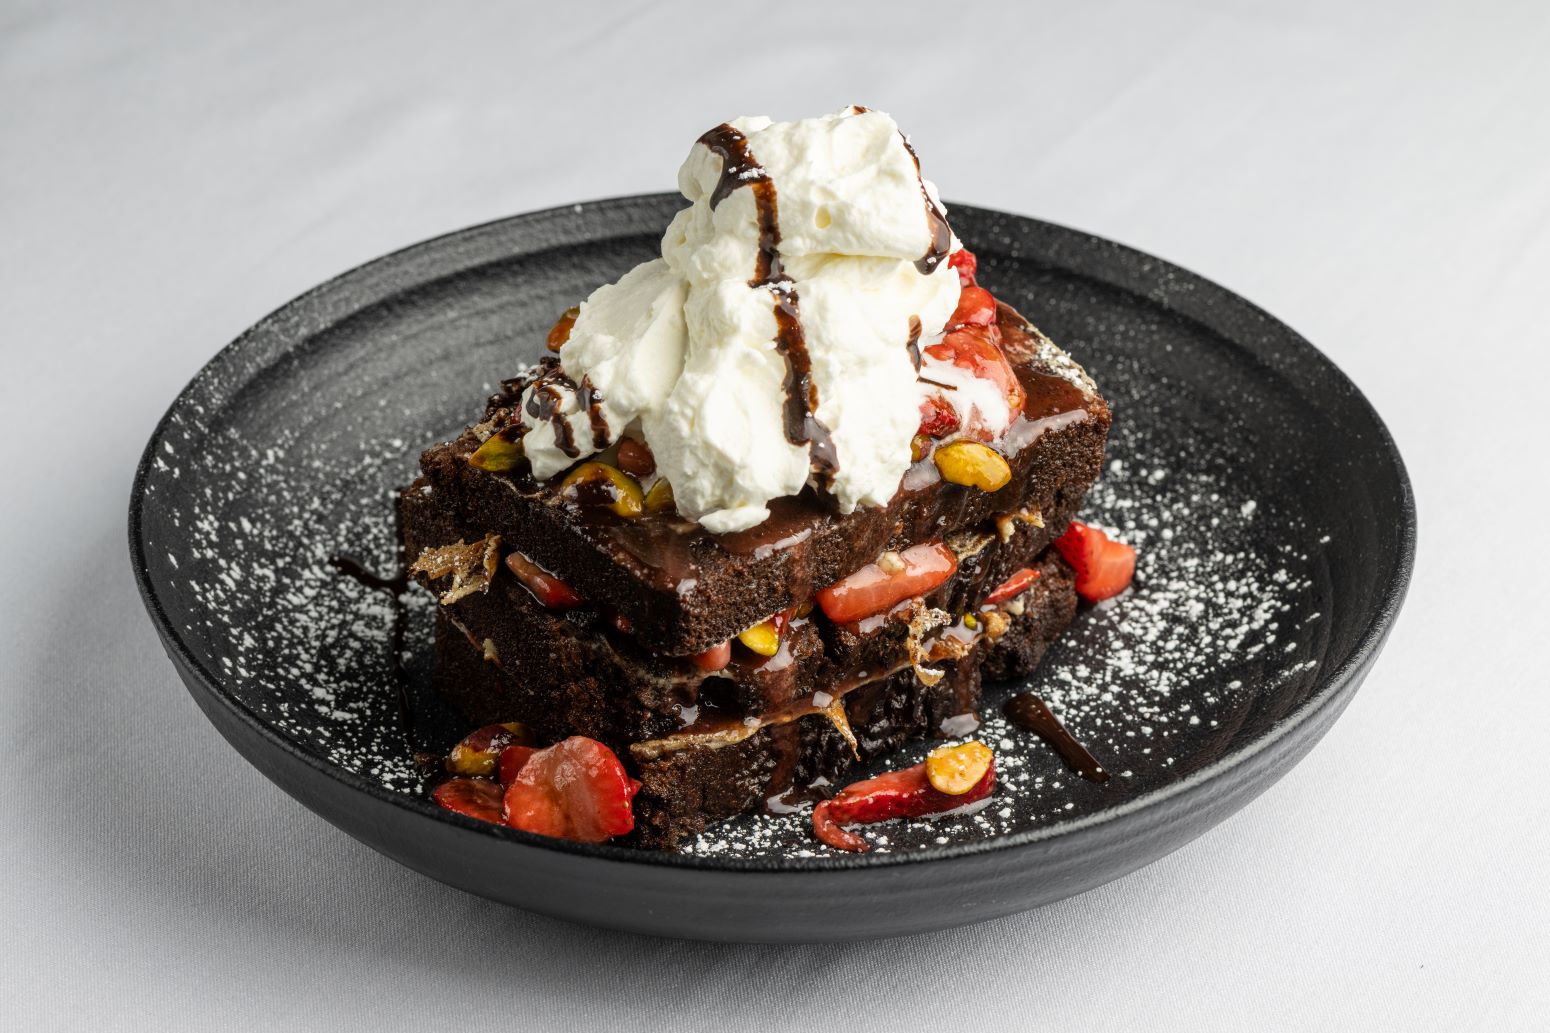 An image of Mi Piace's Chocolate French Toast from their new brunch menu.